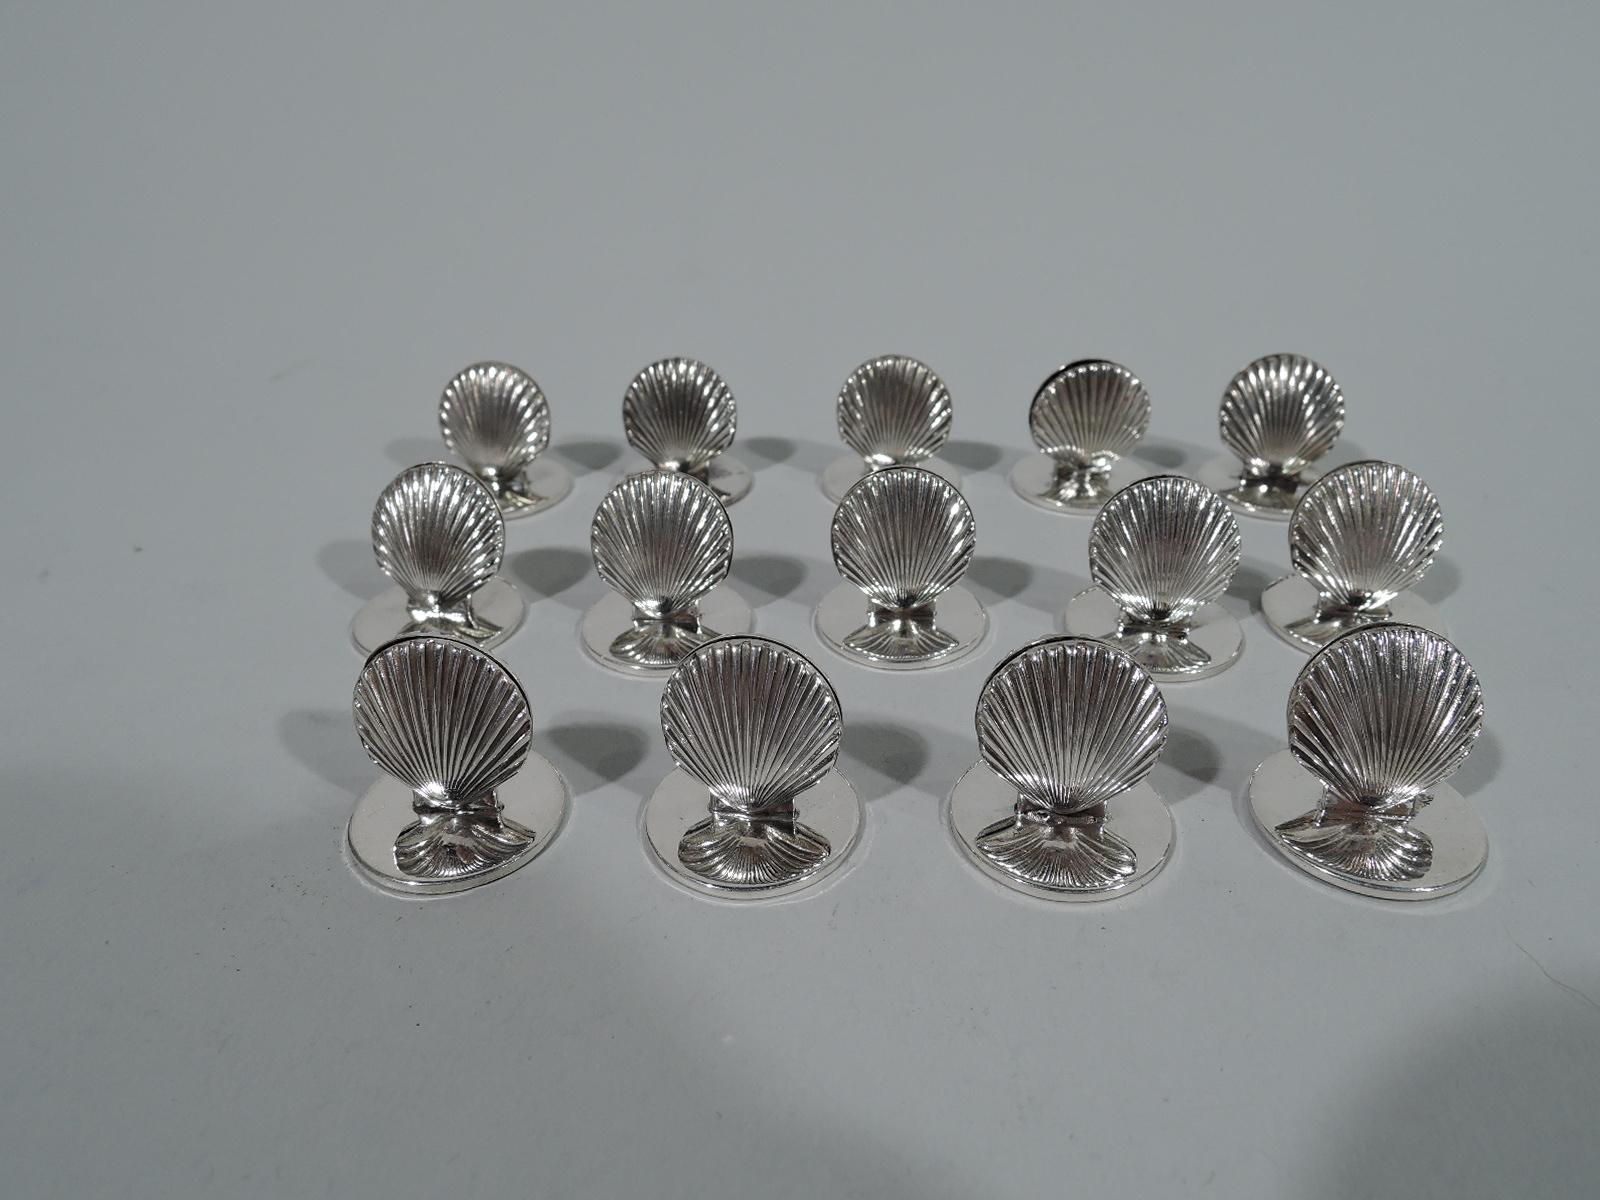 Set of 14 modern classical sterling silver place card holders. Made by Tiffany & Co. in New York, circa 1965. Each: Double-sided scallop shell mounted to flat circular base. Hallmarked. Total weight: 4.3 troy ounces.